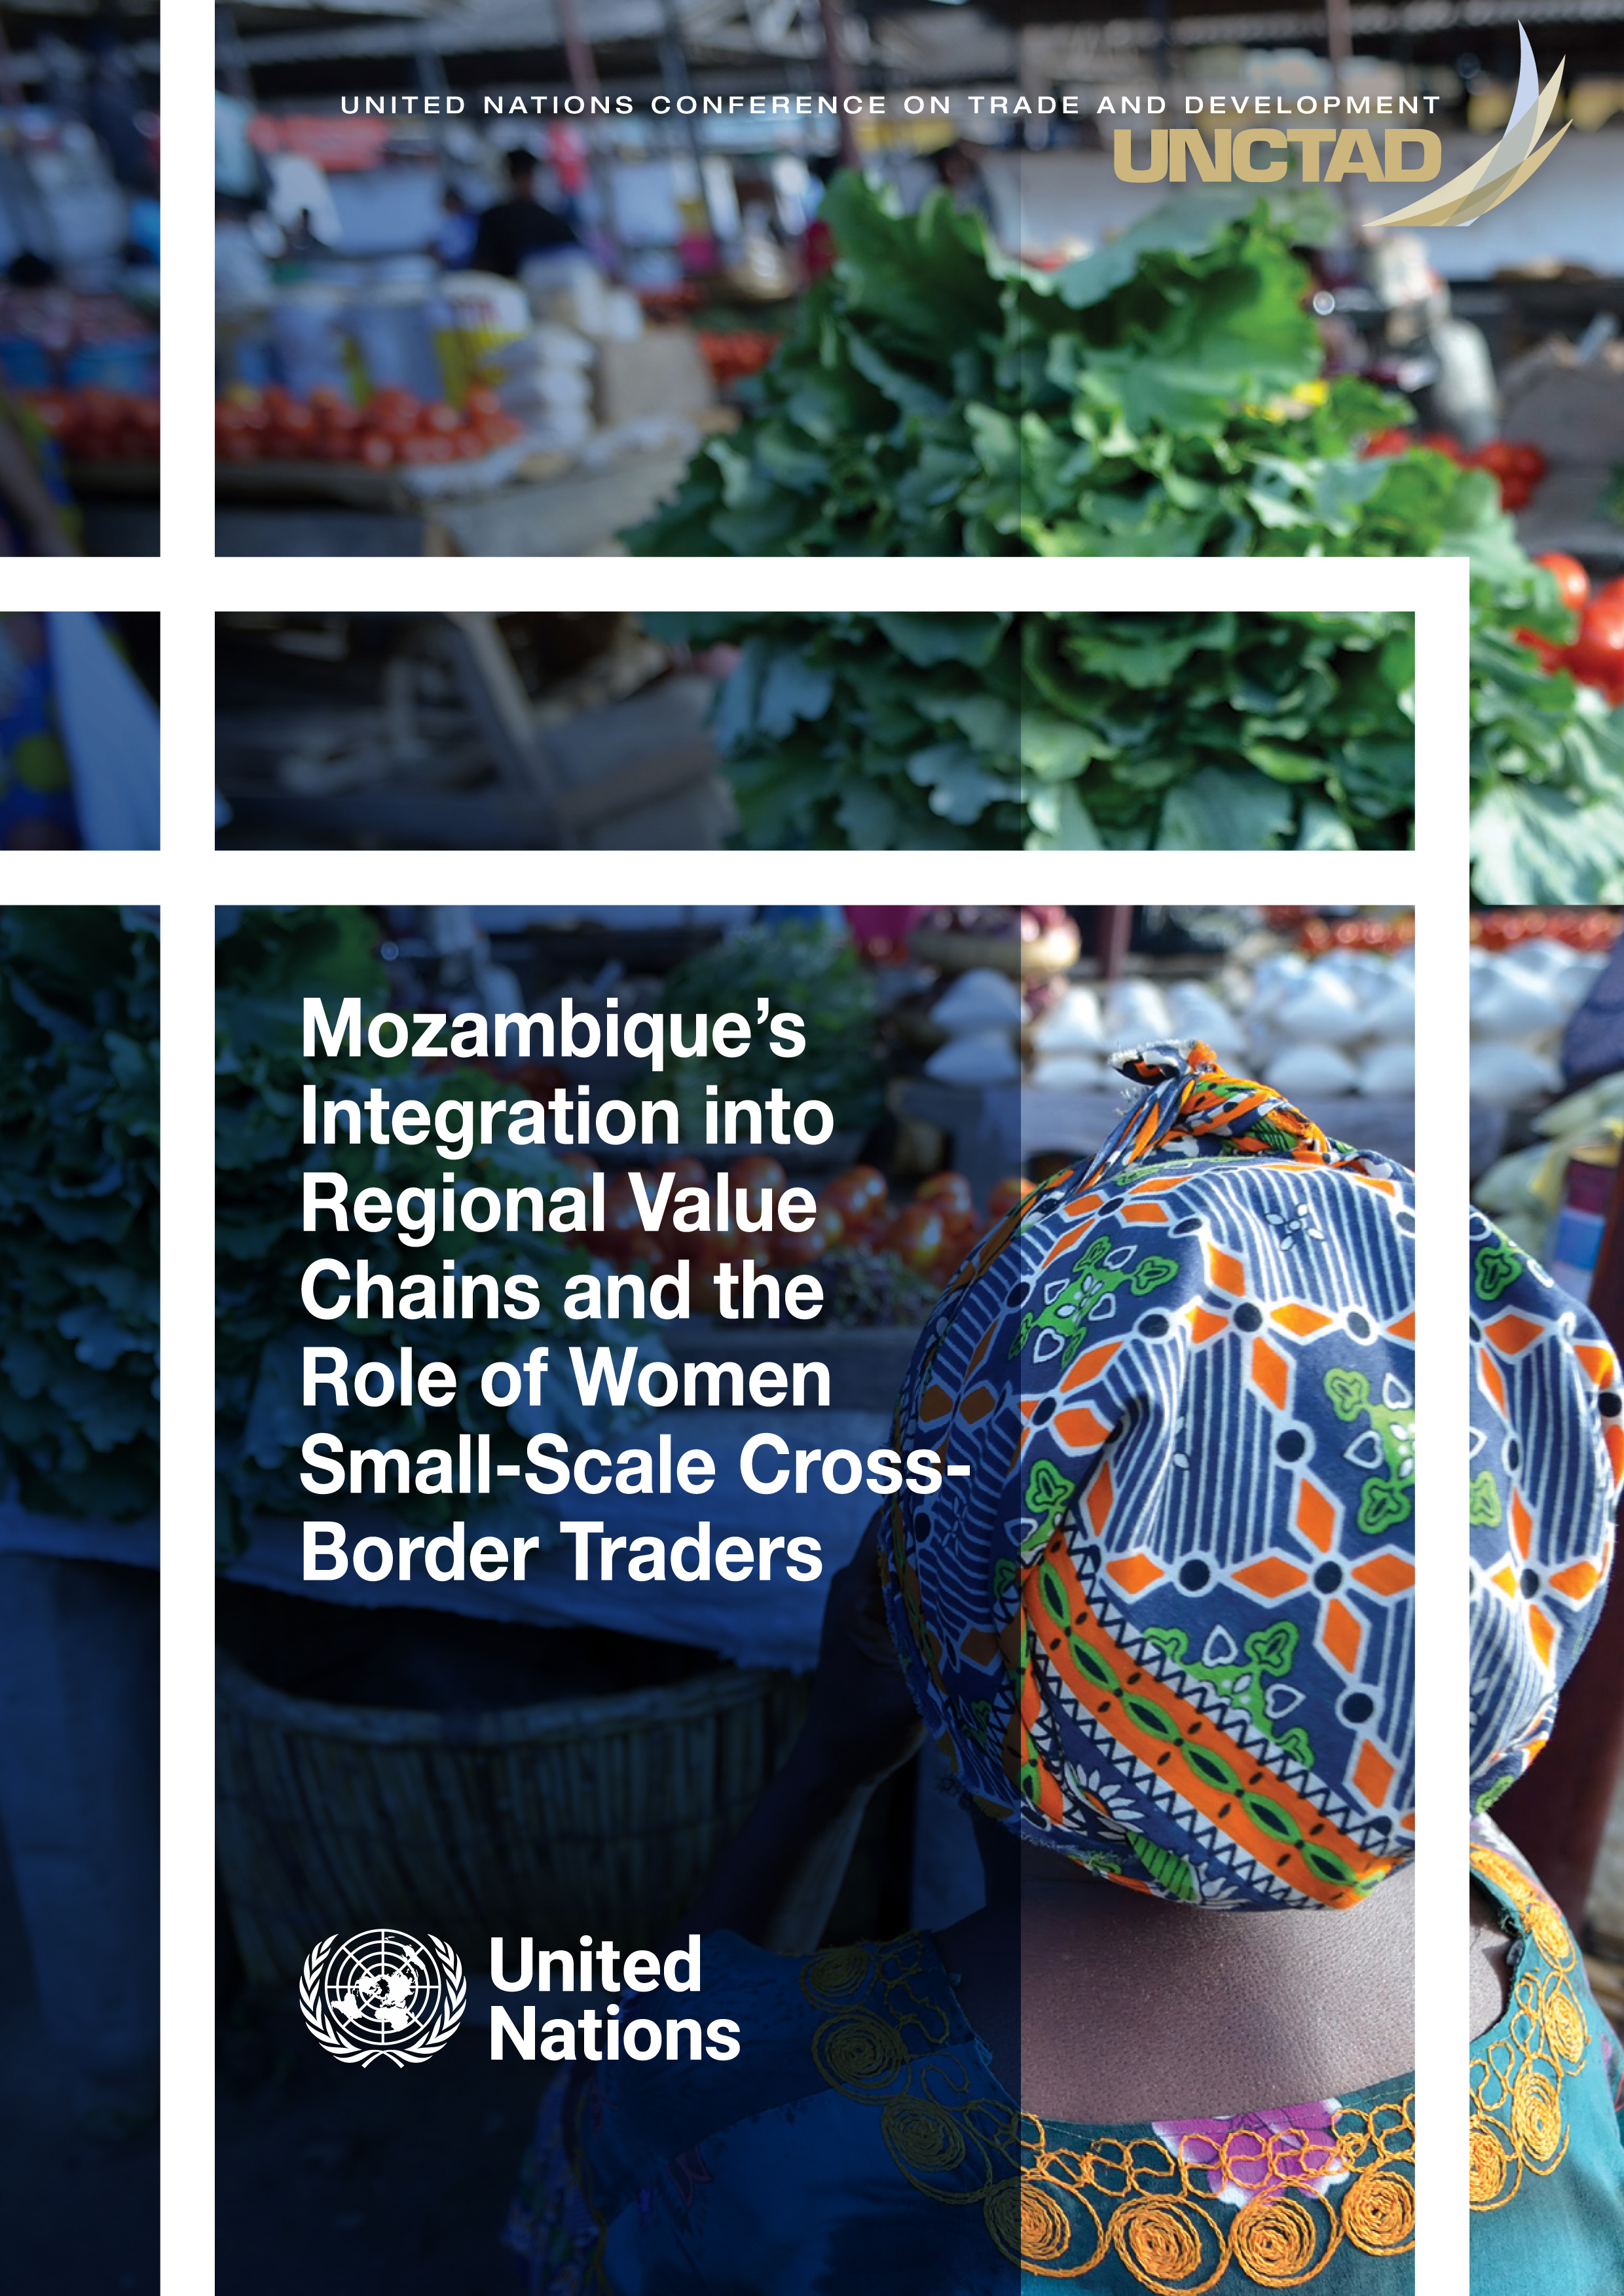 image of Mozambique’s Integration into Regional Value Chains and the Role of Women Small-Scale Cross-Border Traders